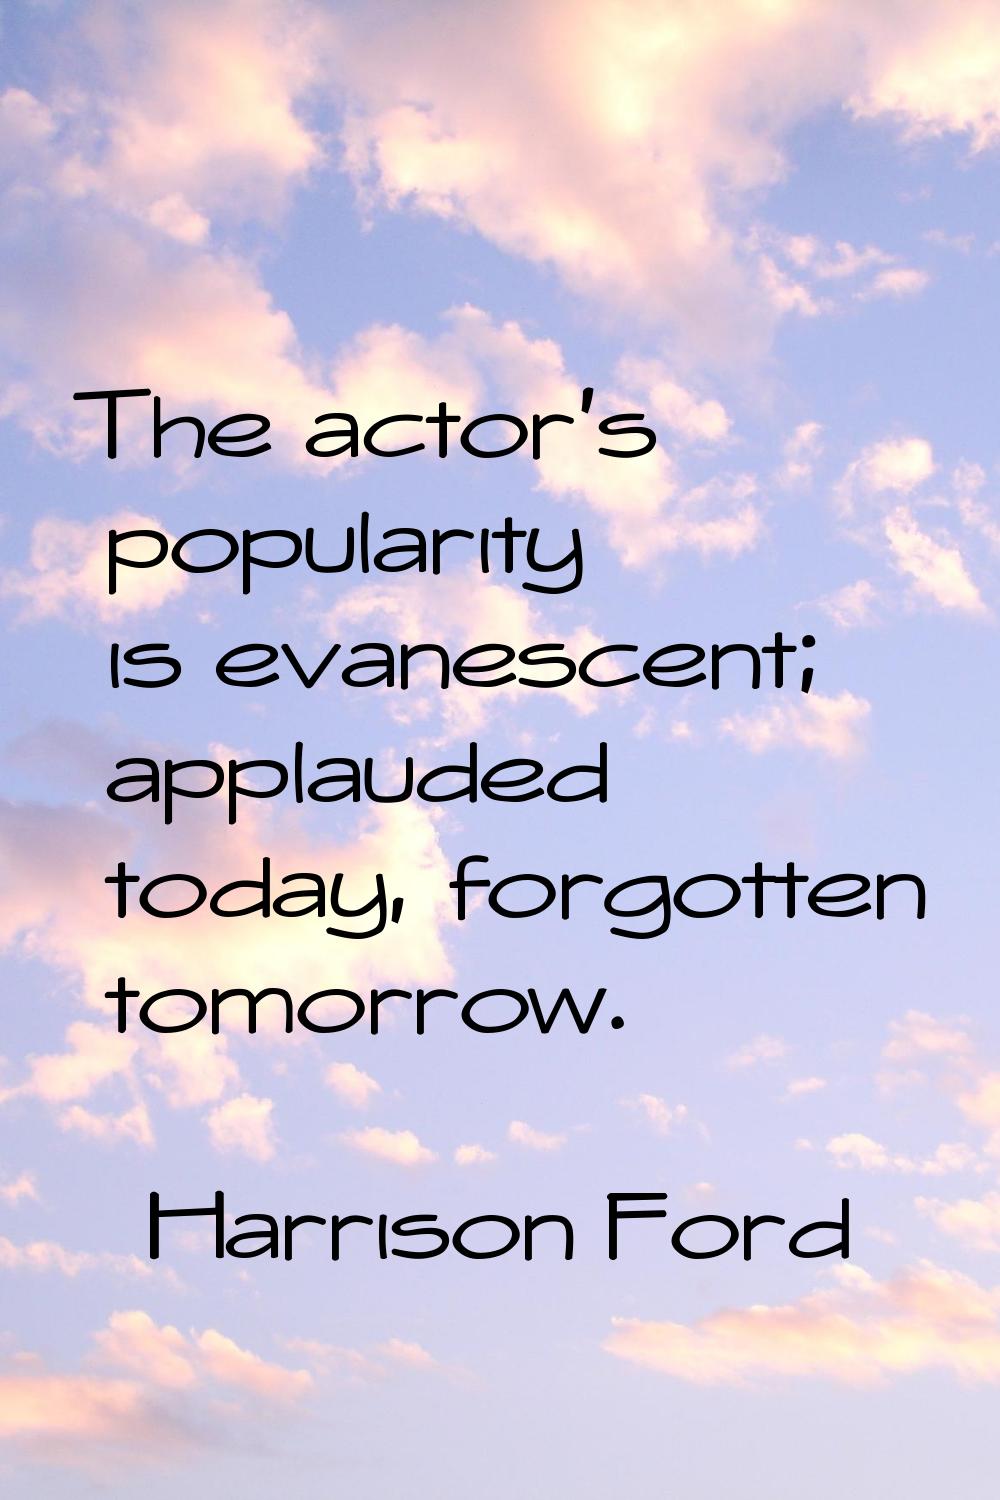 The actor's popularity is evanescent; applauded today, forgotten tomorrow.